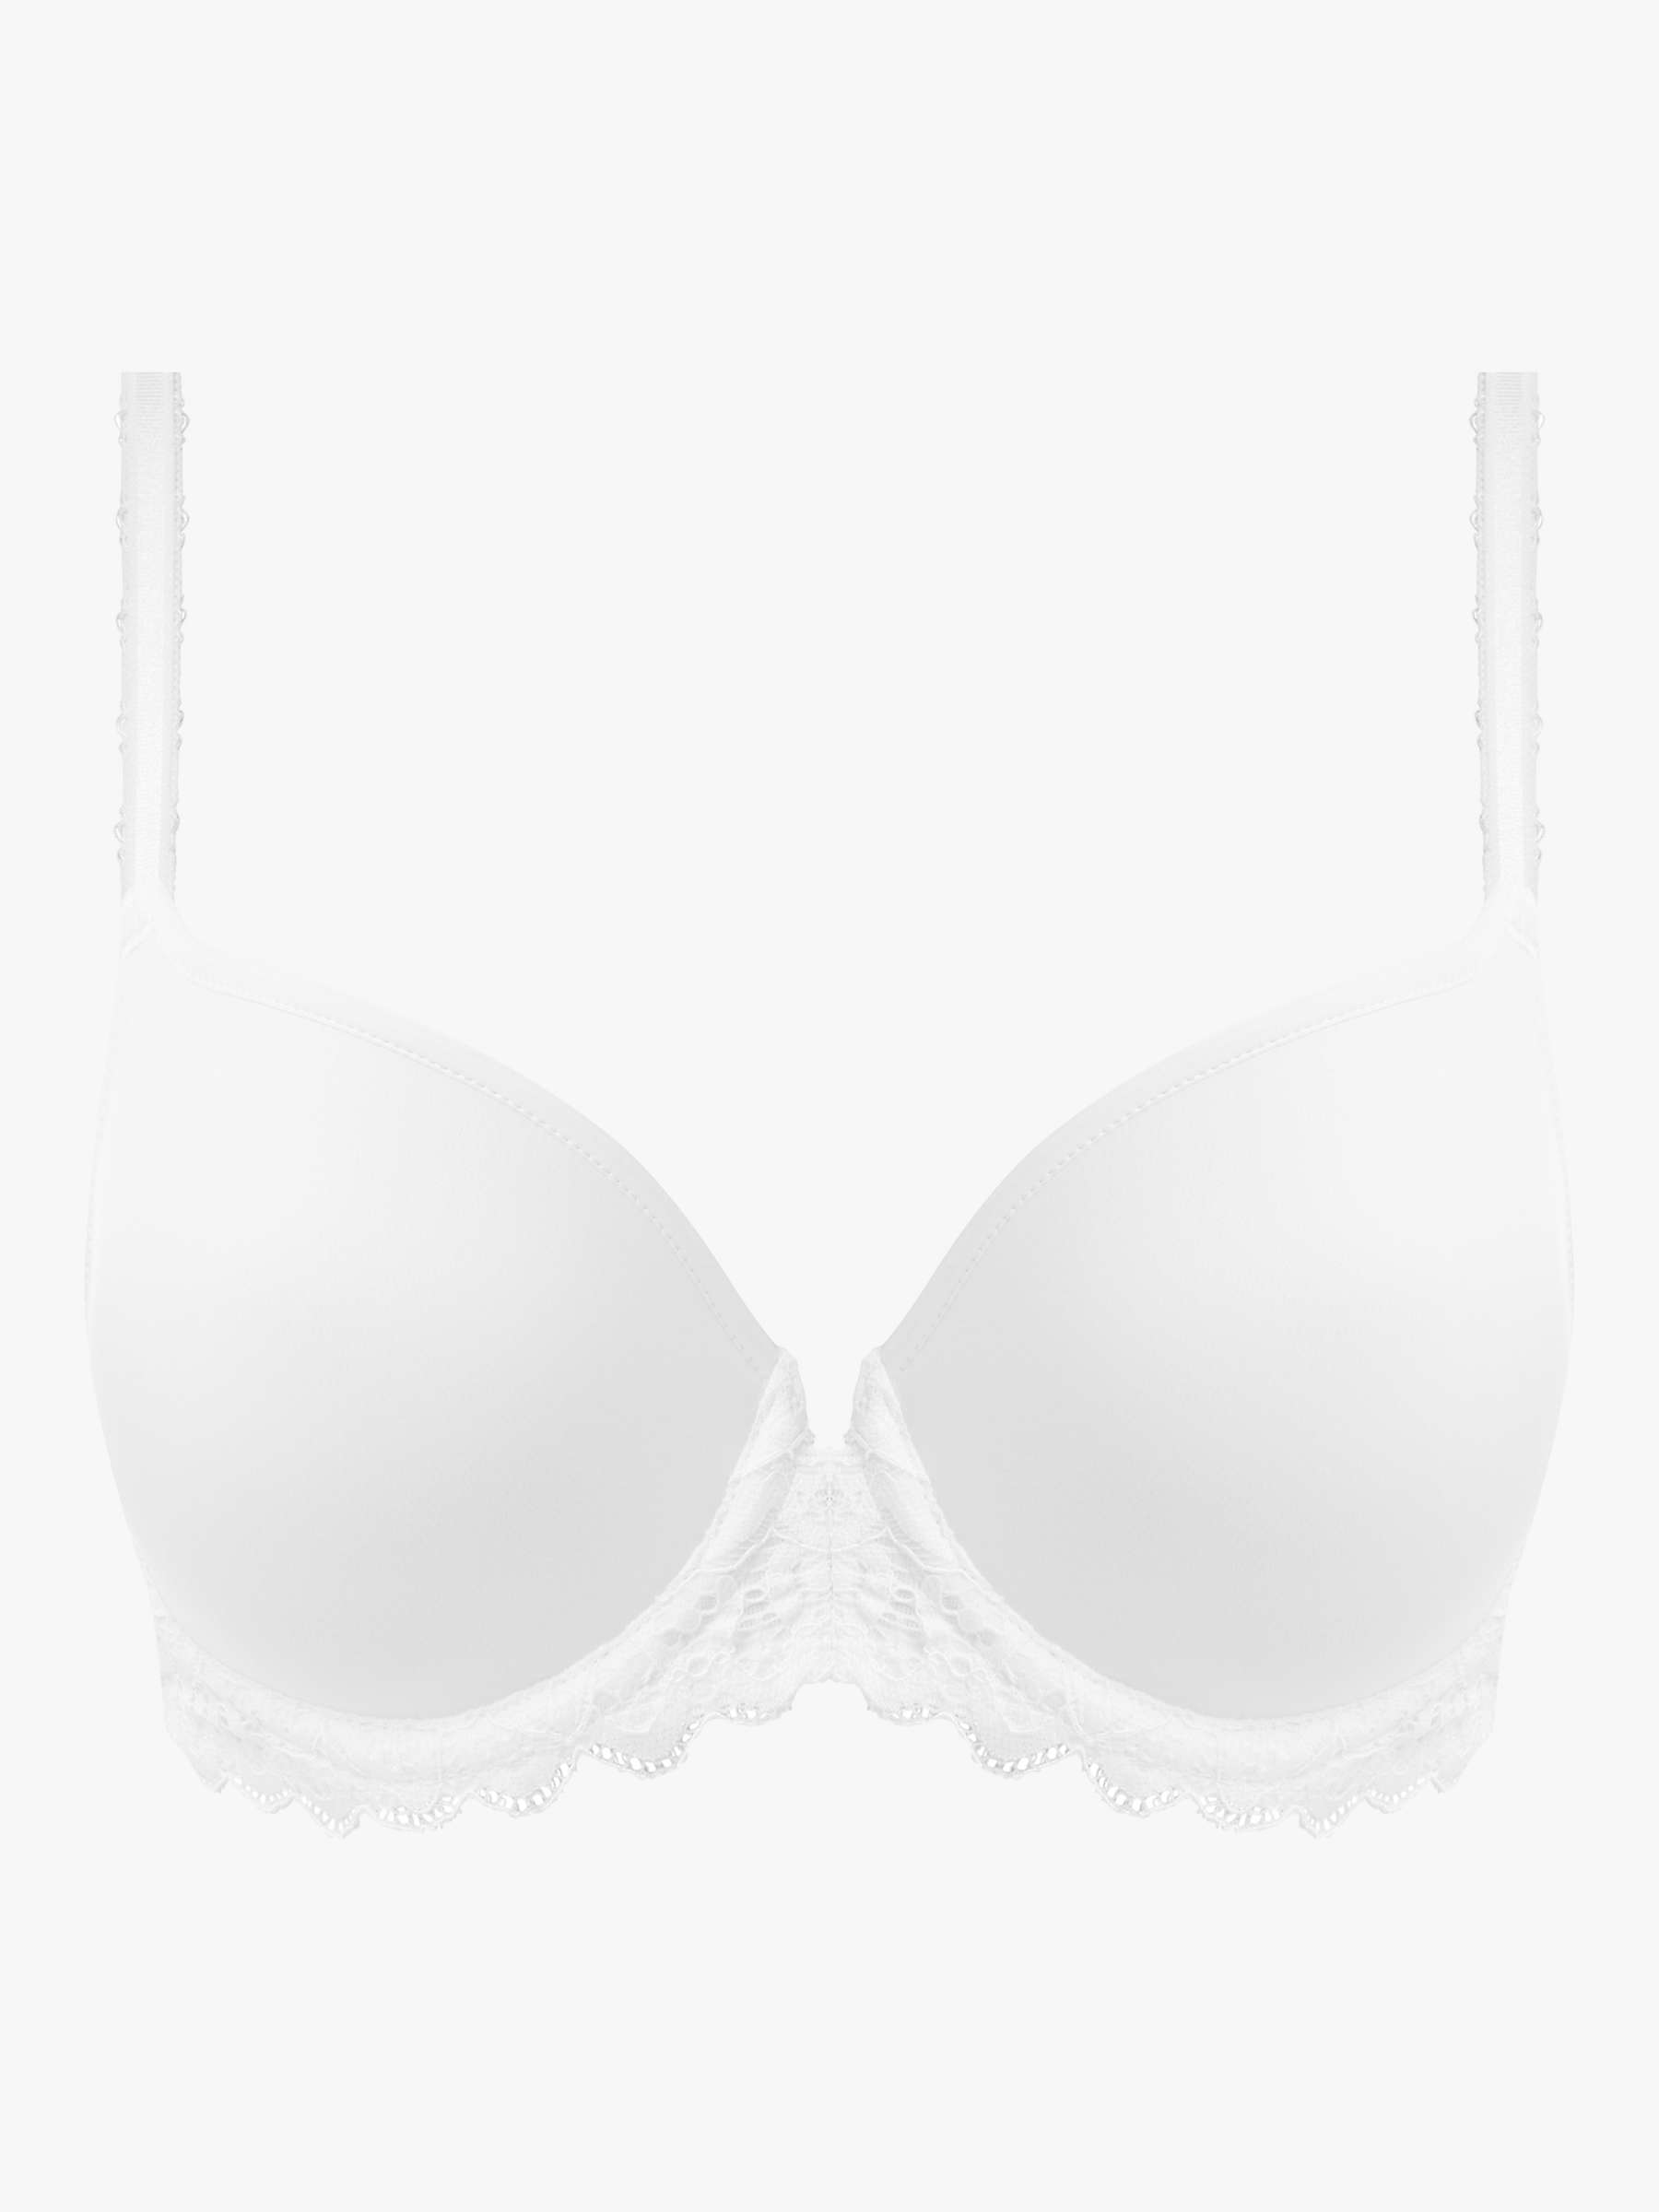 Buy Wacoal Raffiné Underwired Contour Bra Online at johnlewis.com